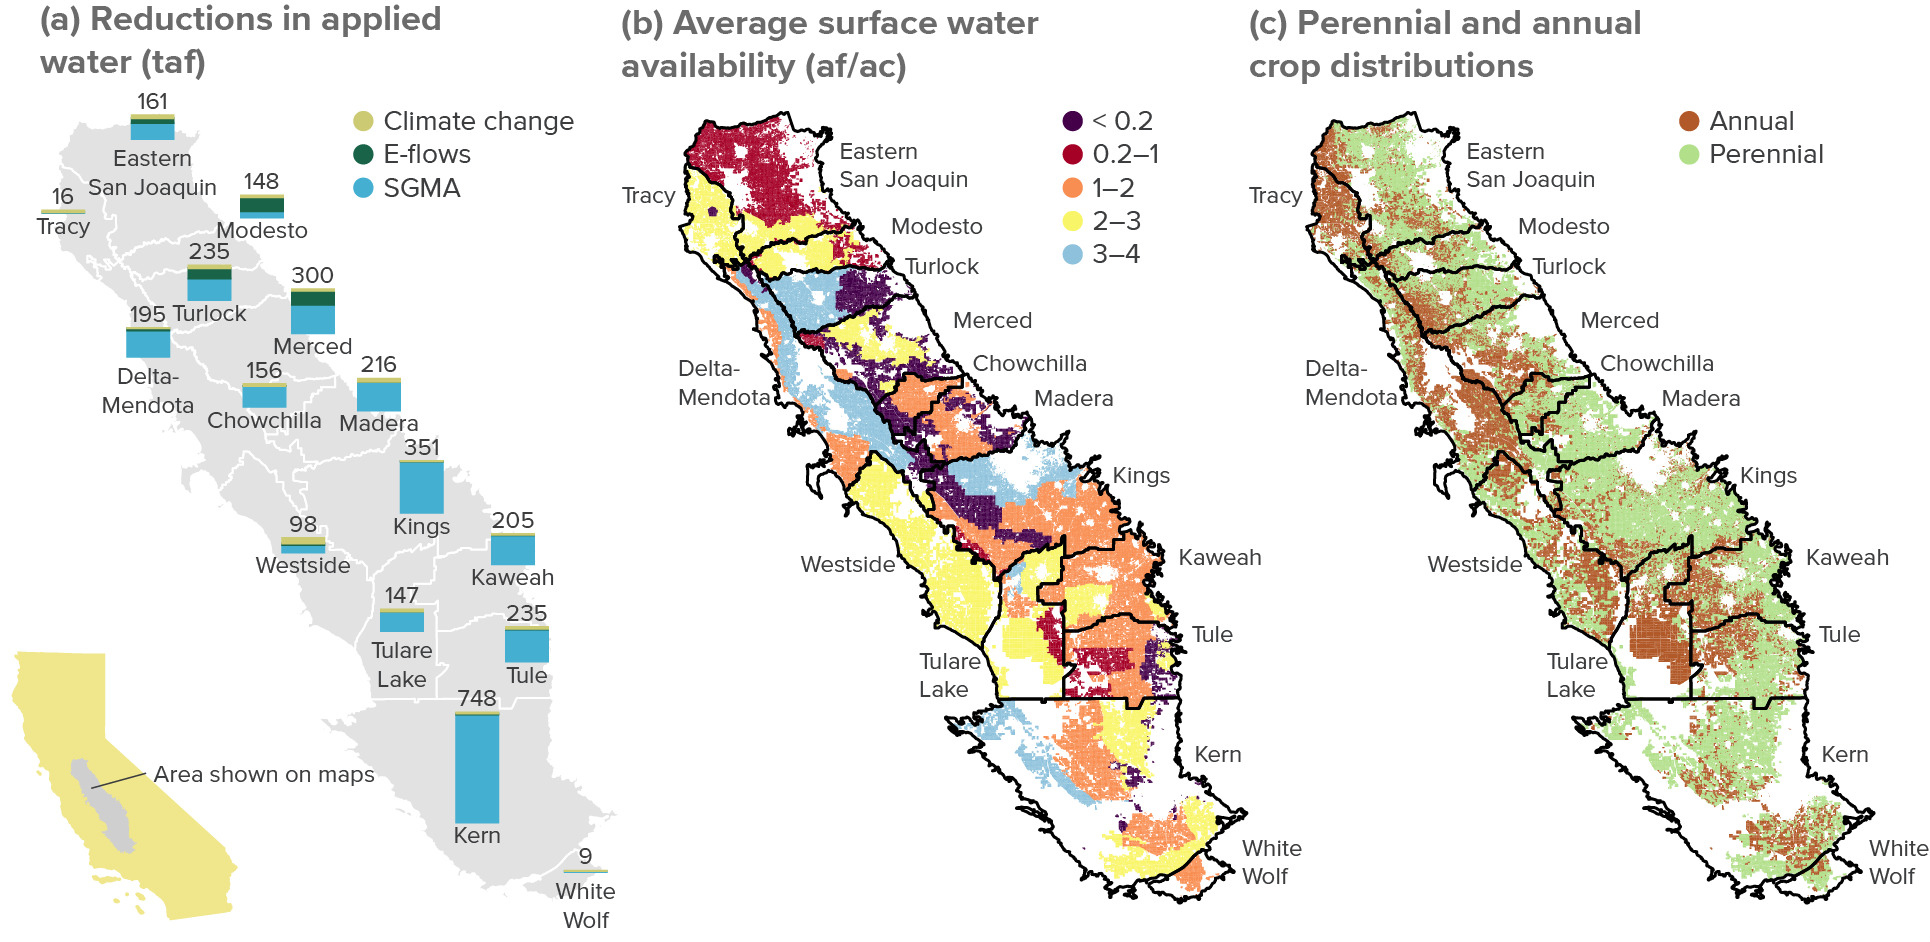 figure - Water scarcity impacts could vary widely both within and across groundwater basins, reflecting local differences in surface water availability and cropping choices